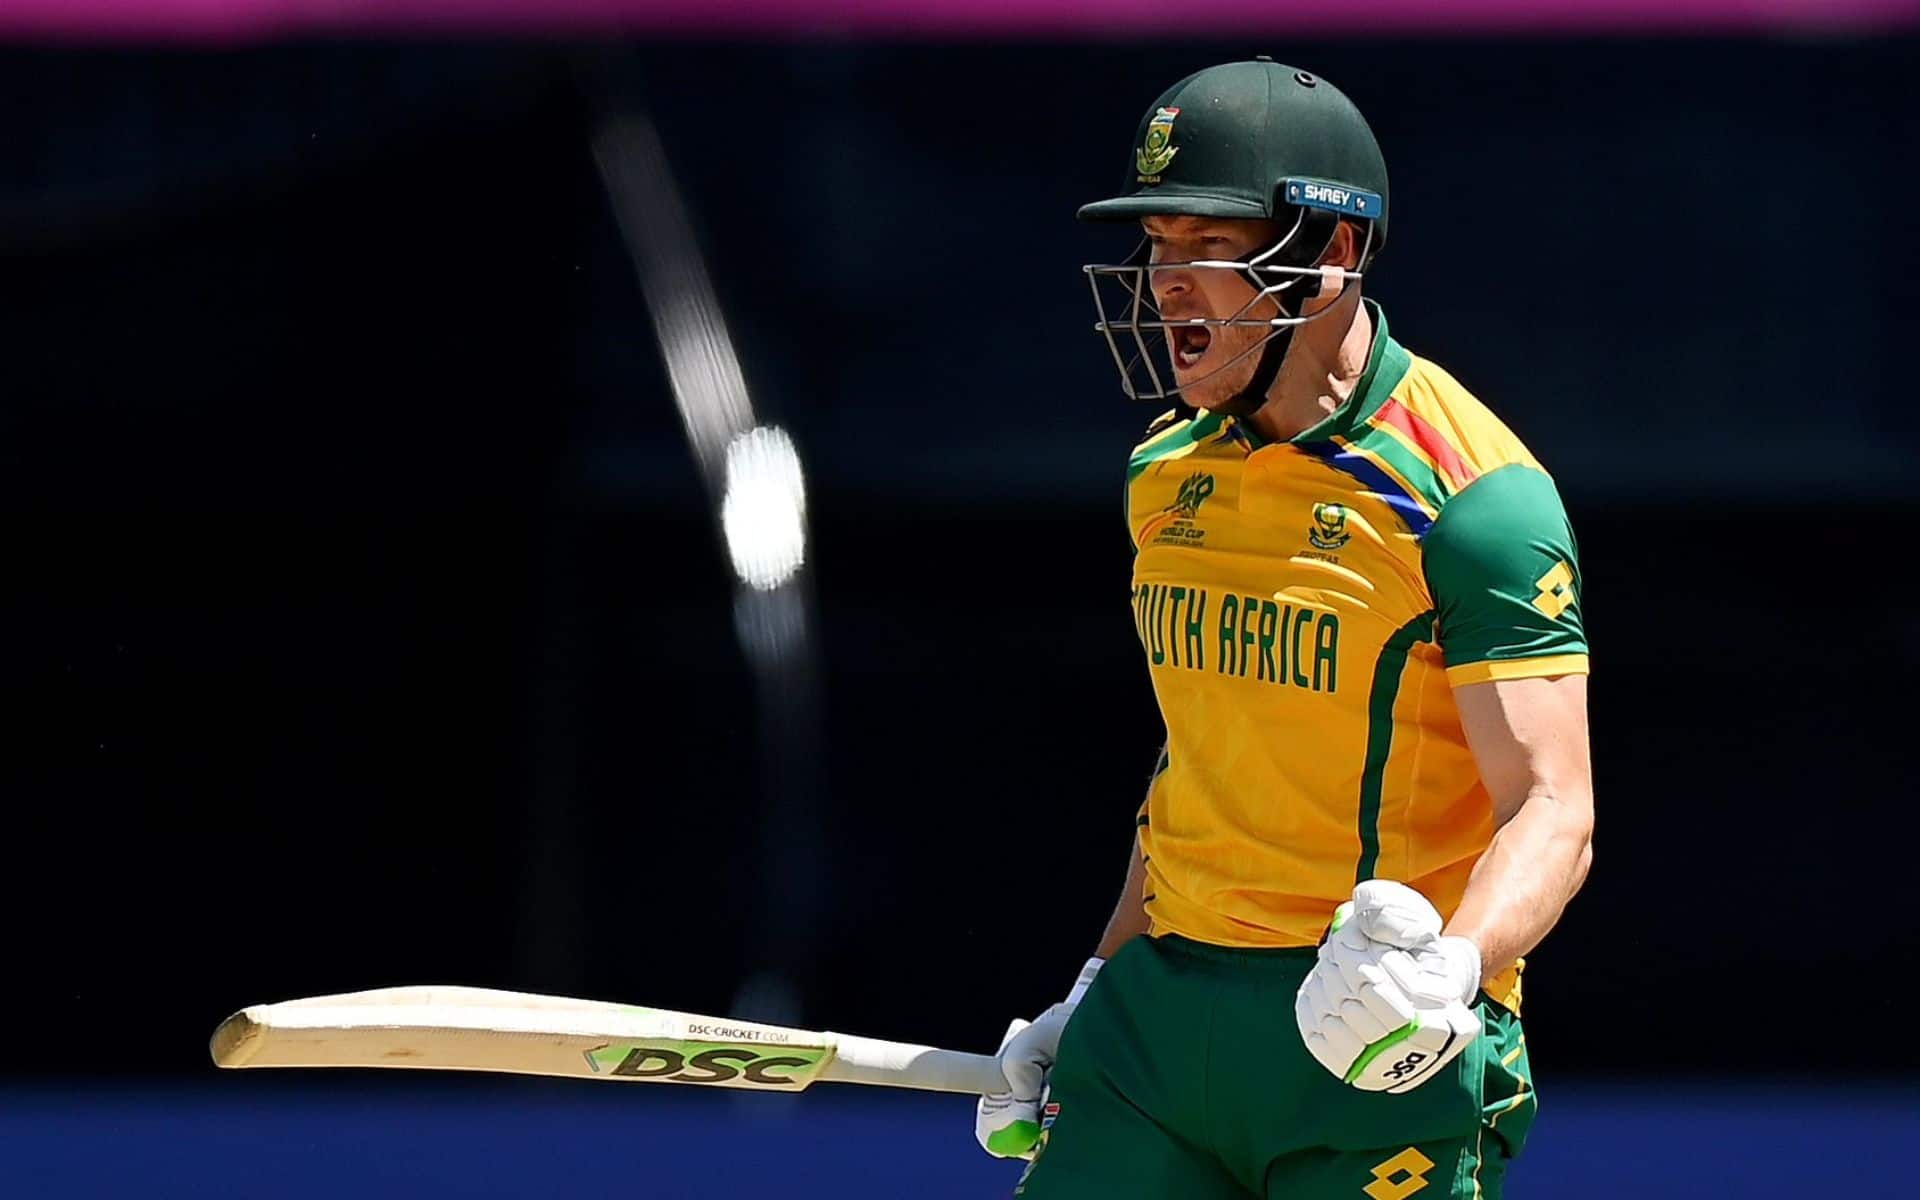 David Miller made the difference for SA against NED (x.com)